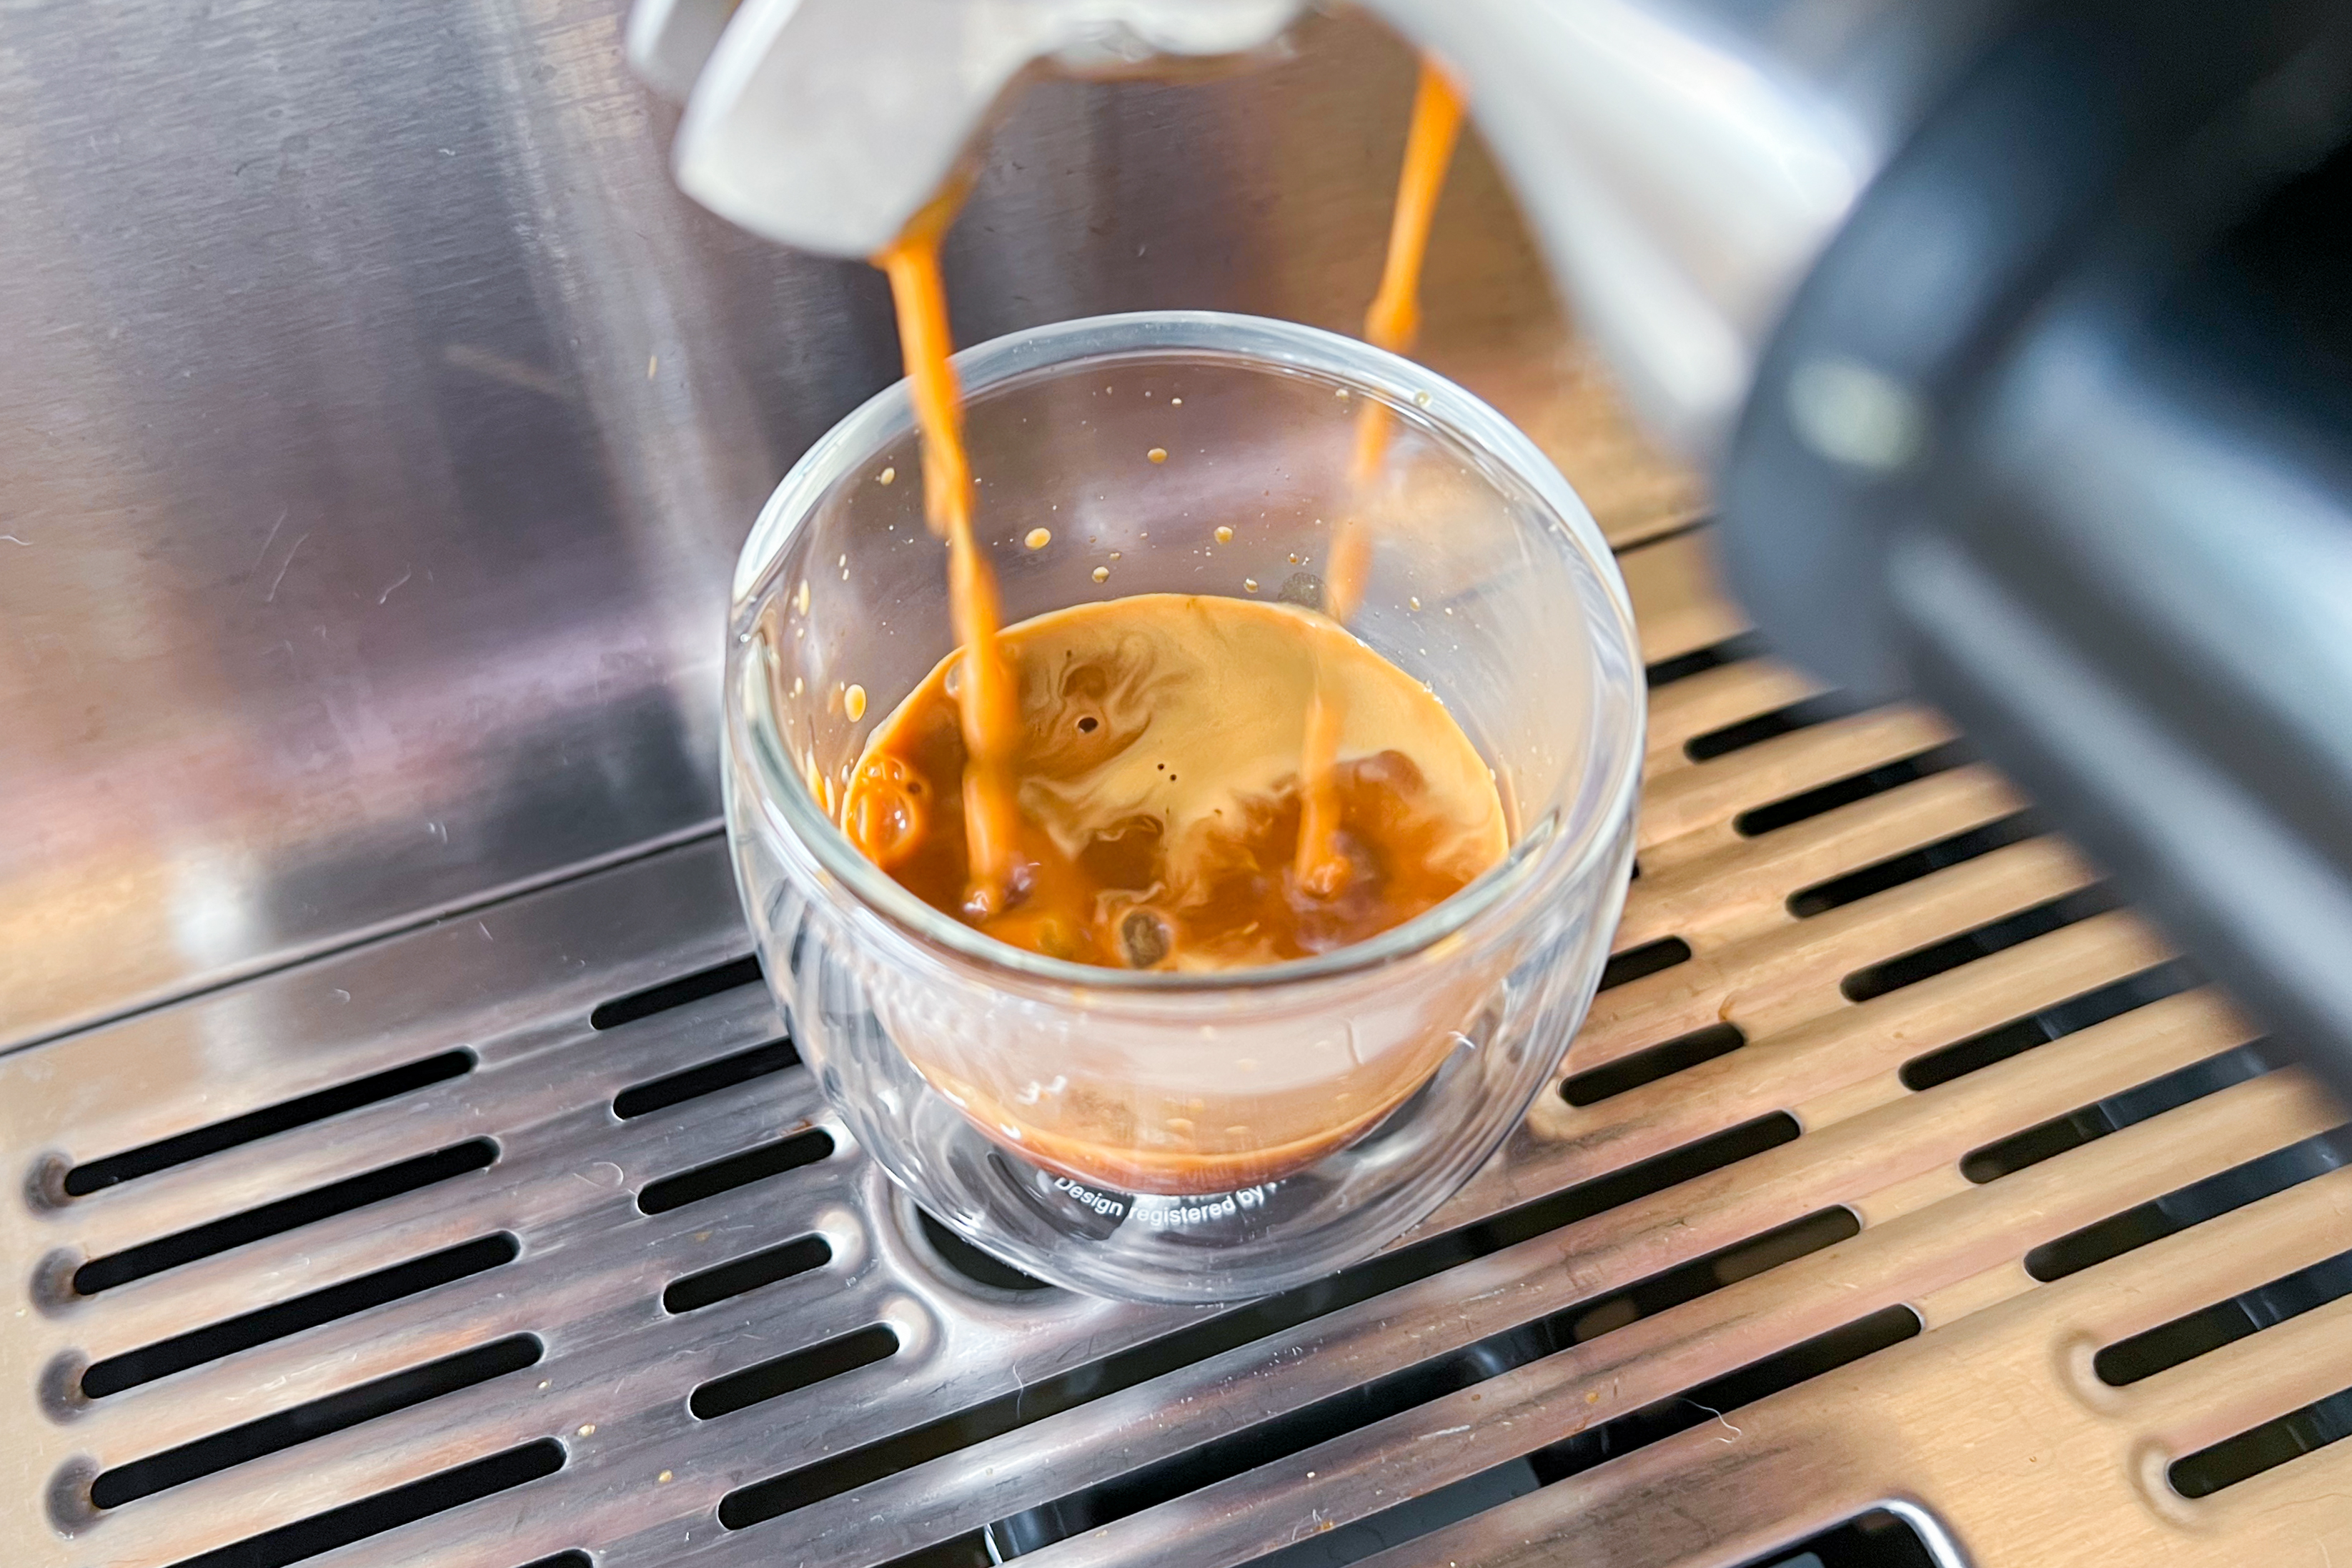 How to make iced coffee in 4 simple steps